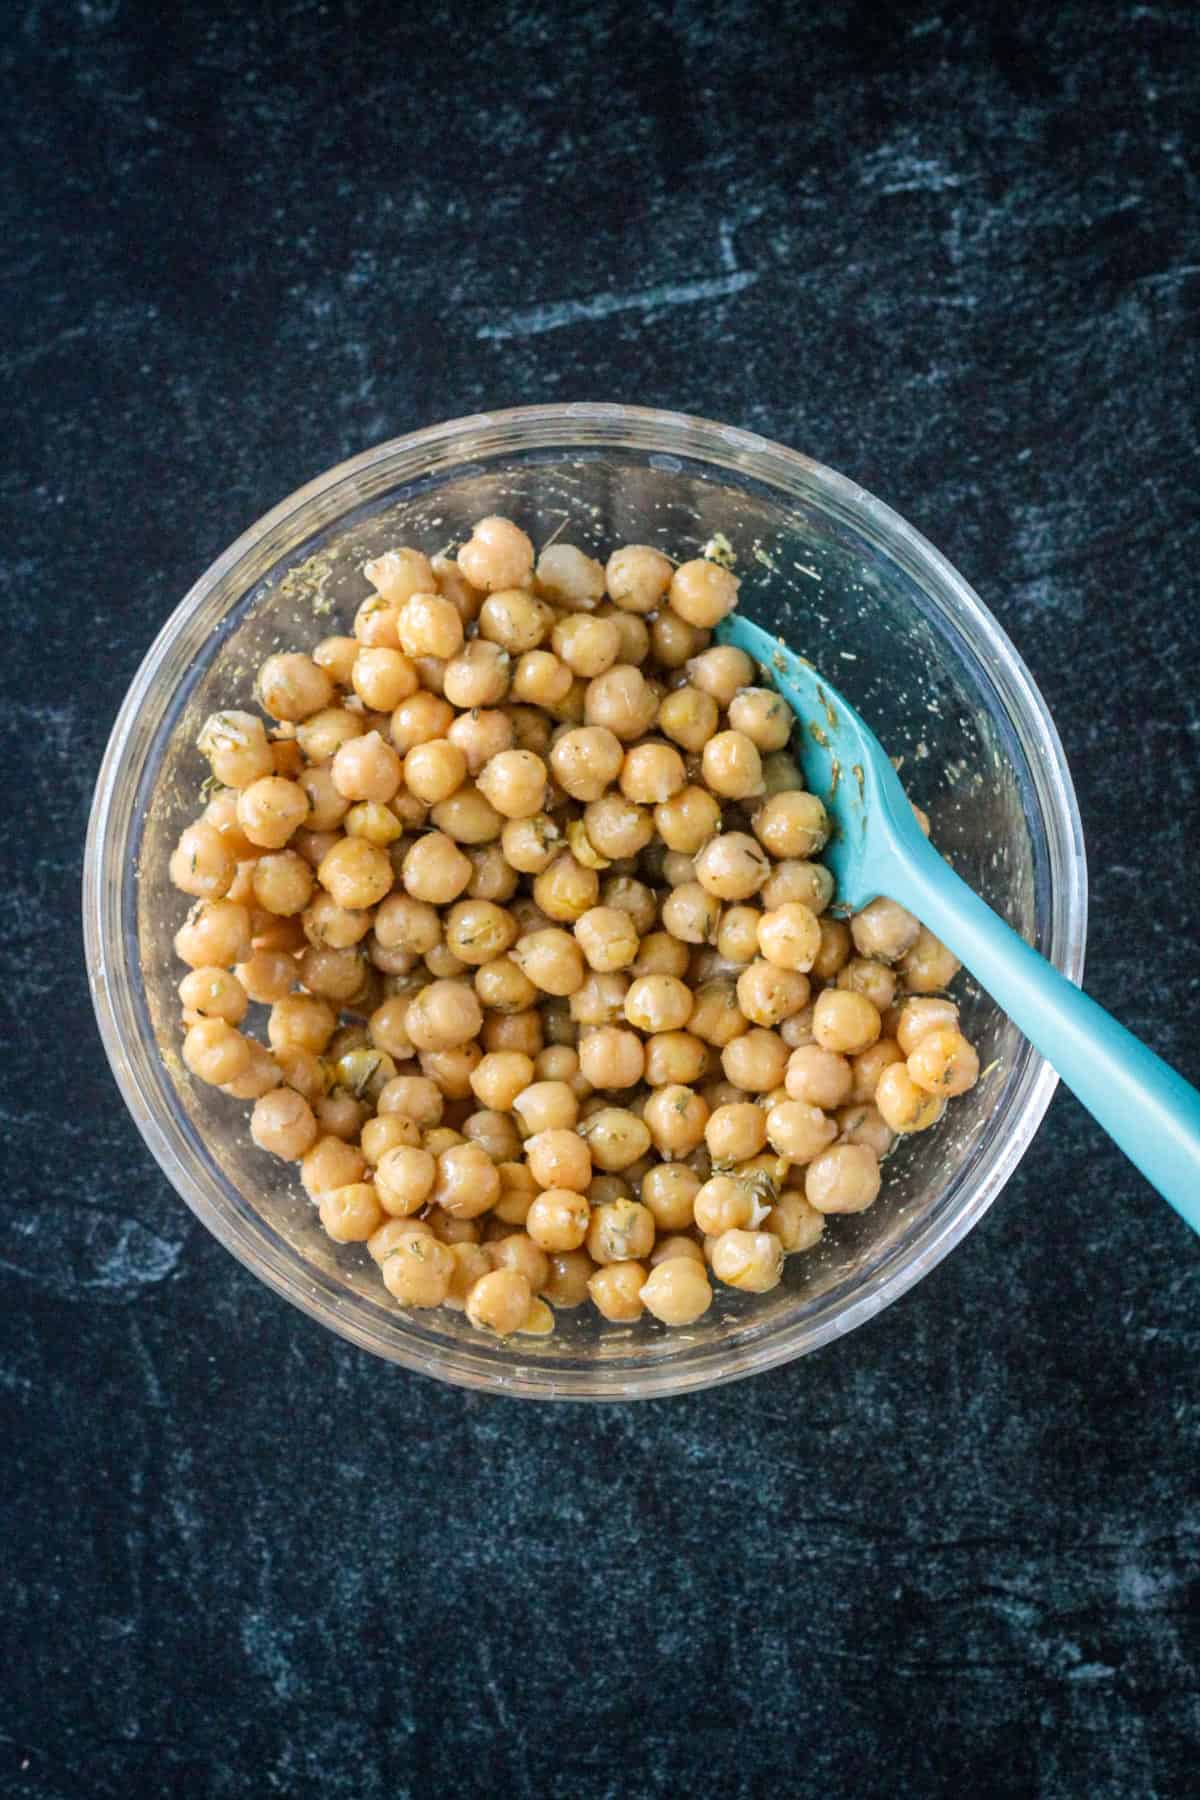 Garbanzo beans with seasonings in a mixing bowl.